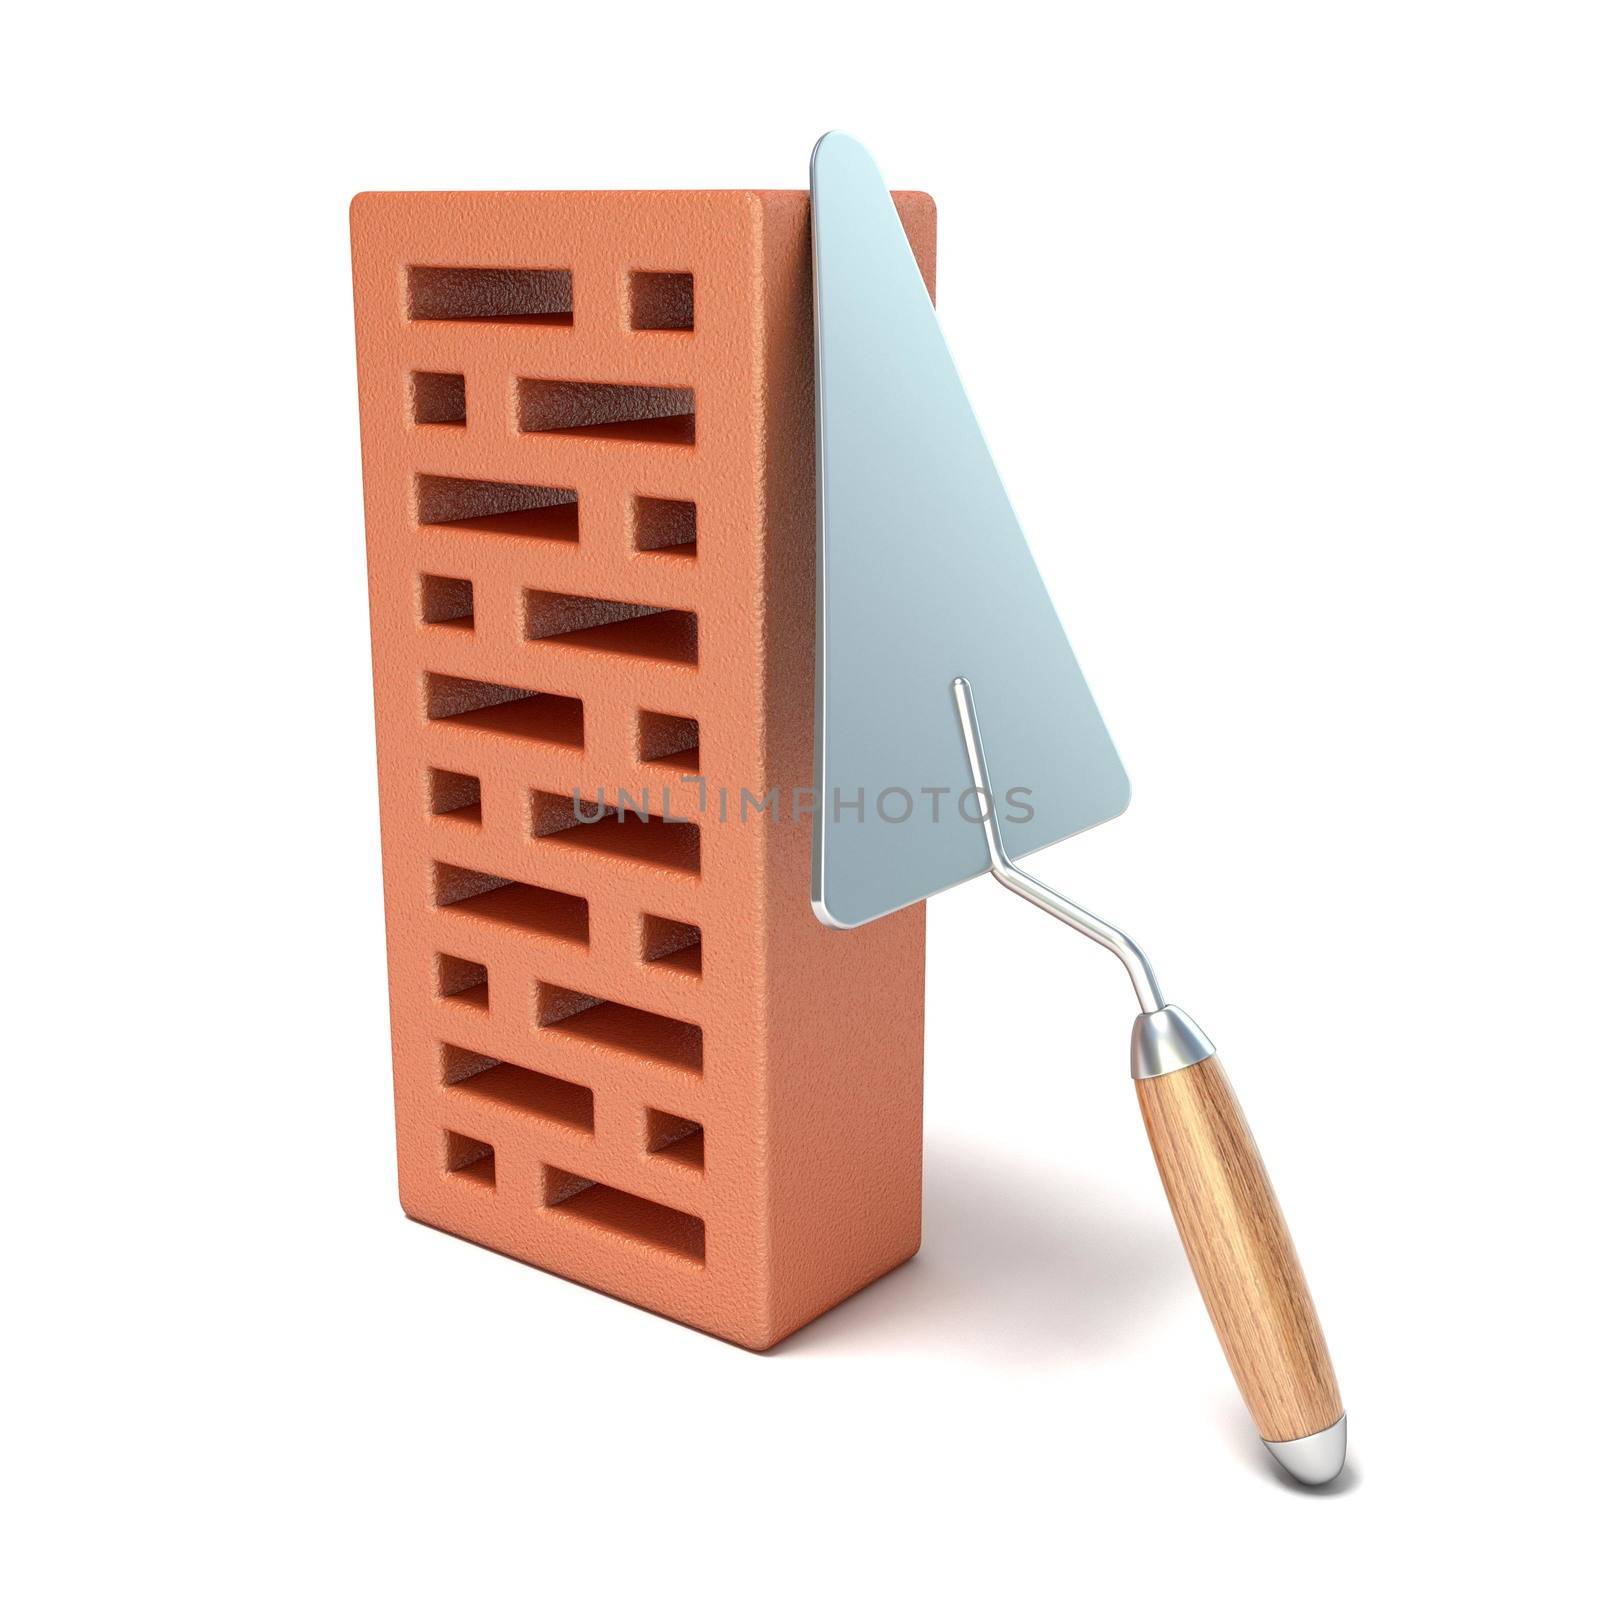 Brick with trowel for construction. 3D render illustration isolated on white background